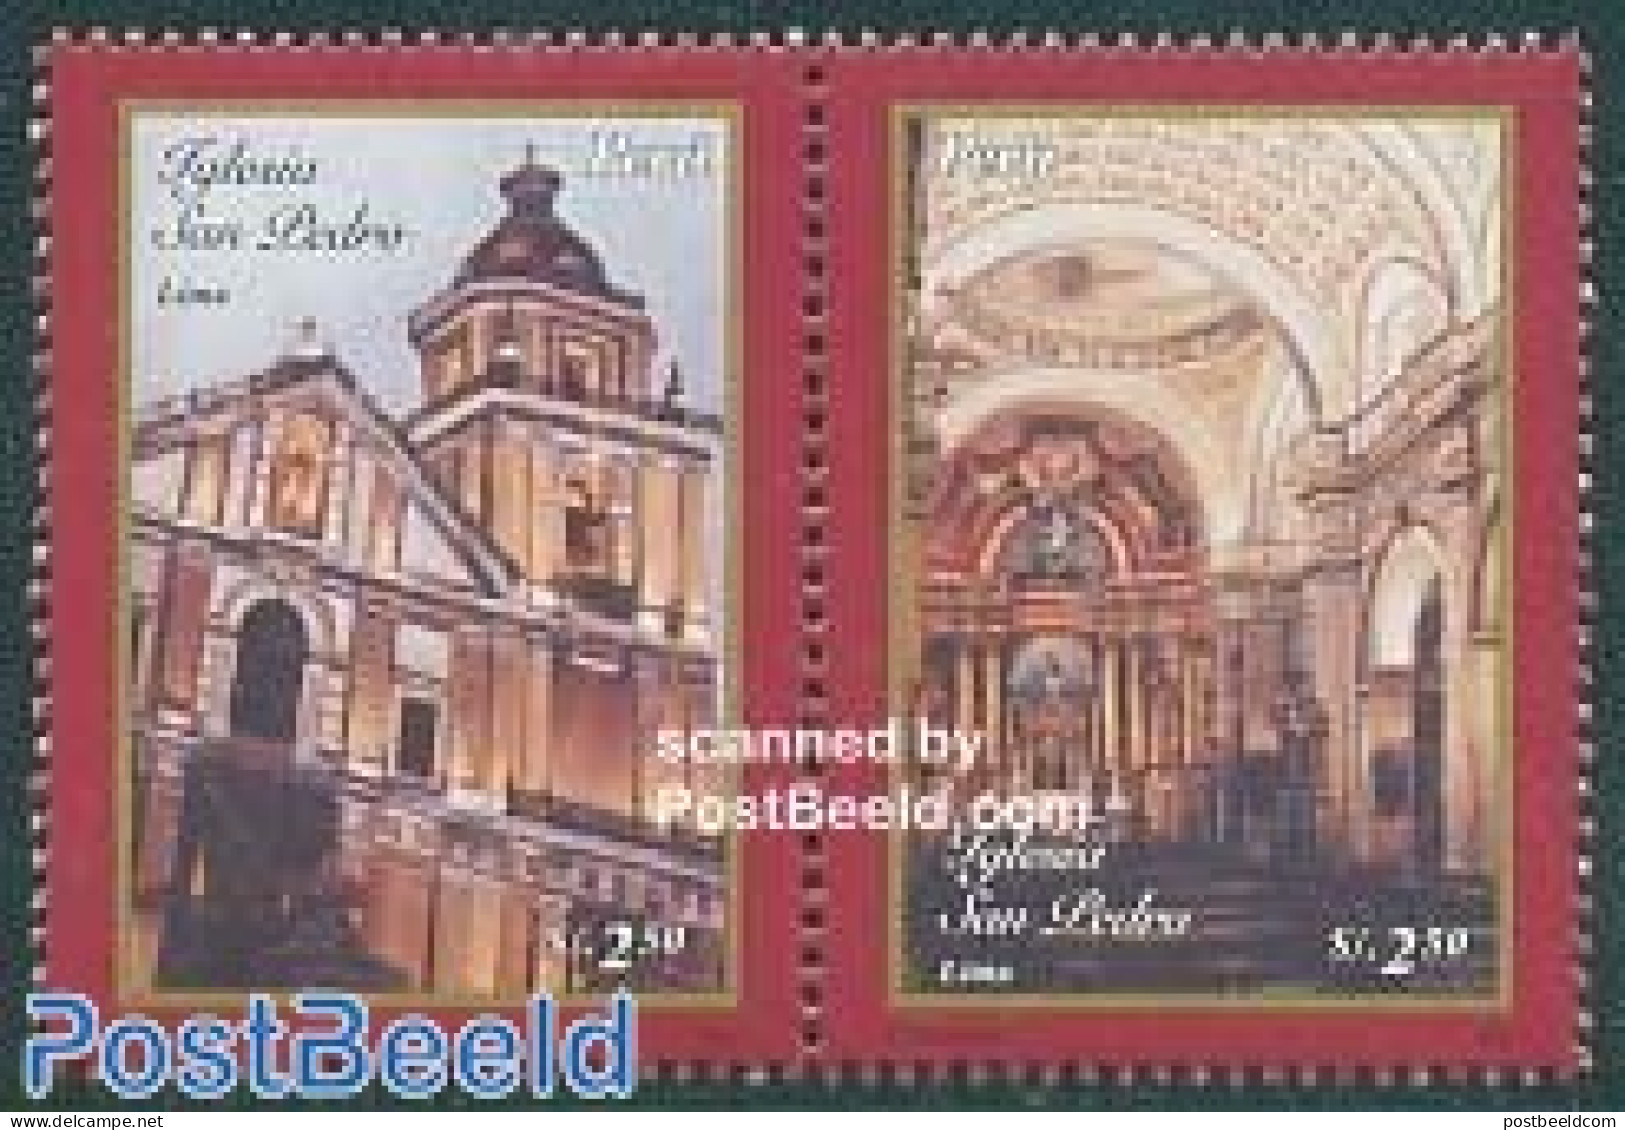 Peru 2005 San Pedro Church 2v [:], Mint NH, Religion - Churches, Temples, Mosques, Synagogues - Iglesias Y Catedrales